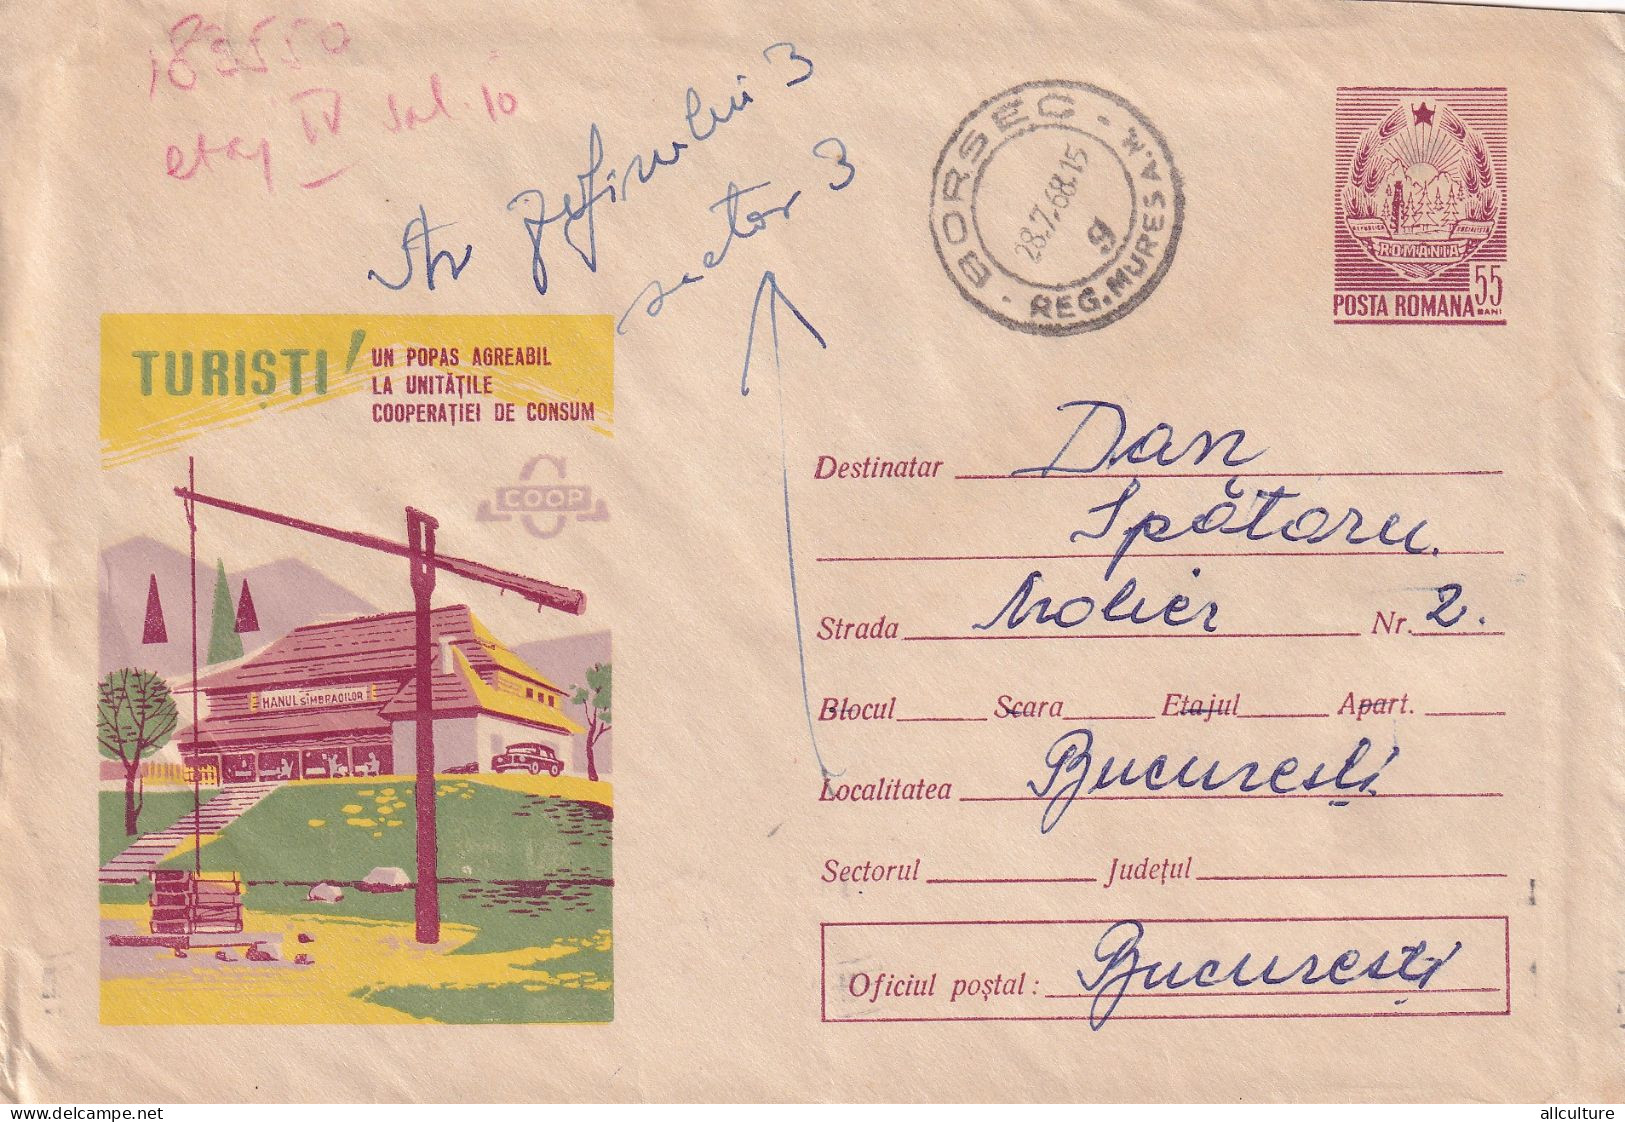 A24558 -  TURIST COOP SAMBRAOILOR HAN Letter Inside  Cover Stationery Romania 1968 - Postal Stationery